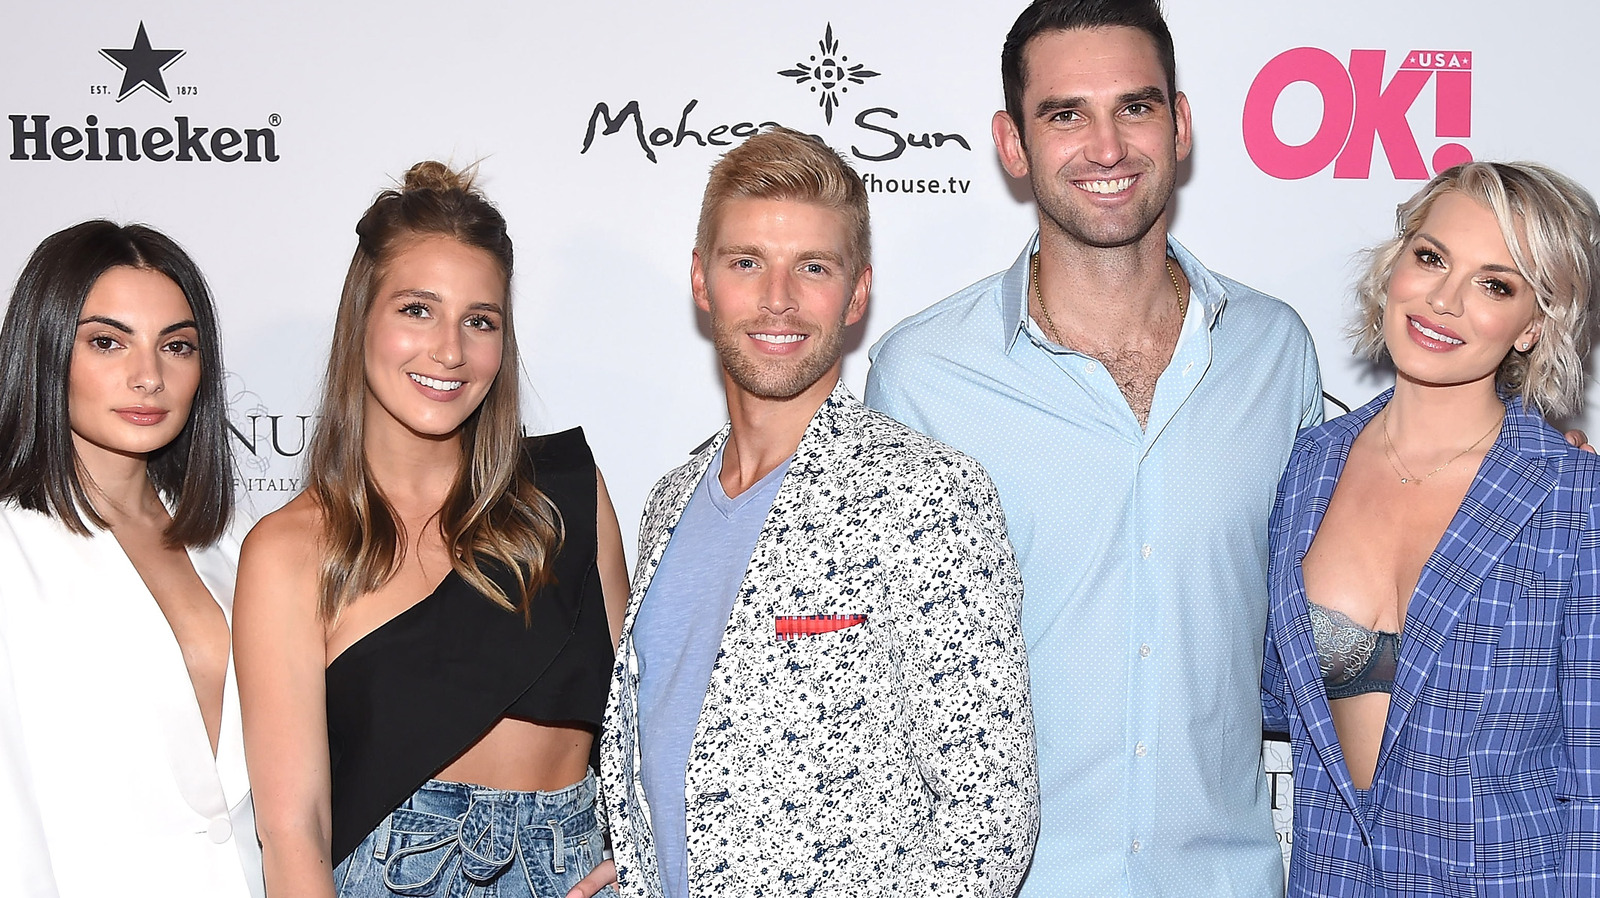 Fans Share Their Favorite Summer House Cast Member, and It's Not Who You Think